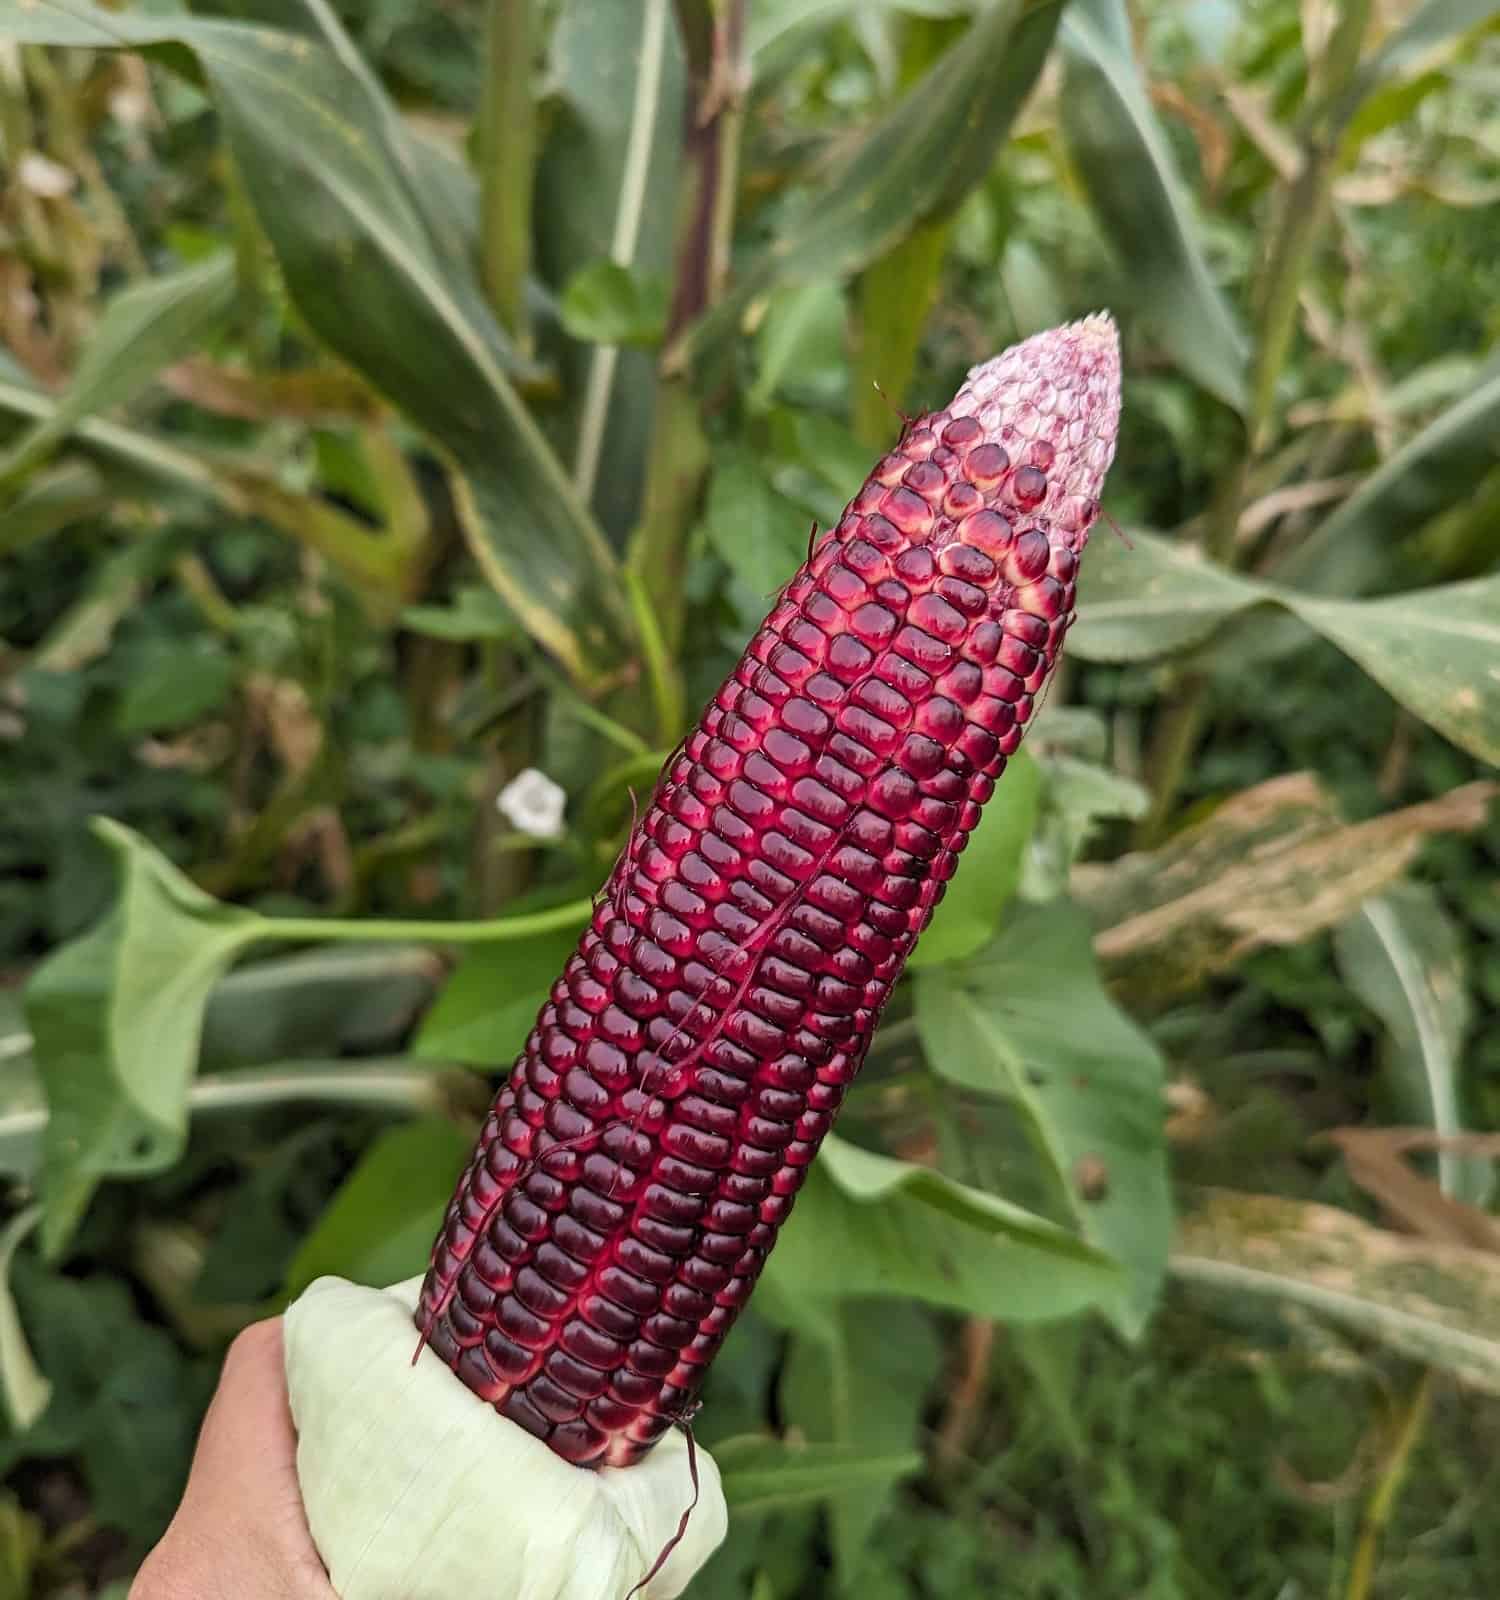 A stalk of Red corn in the foreground with corn field as the background